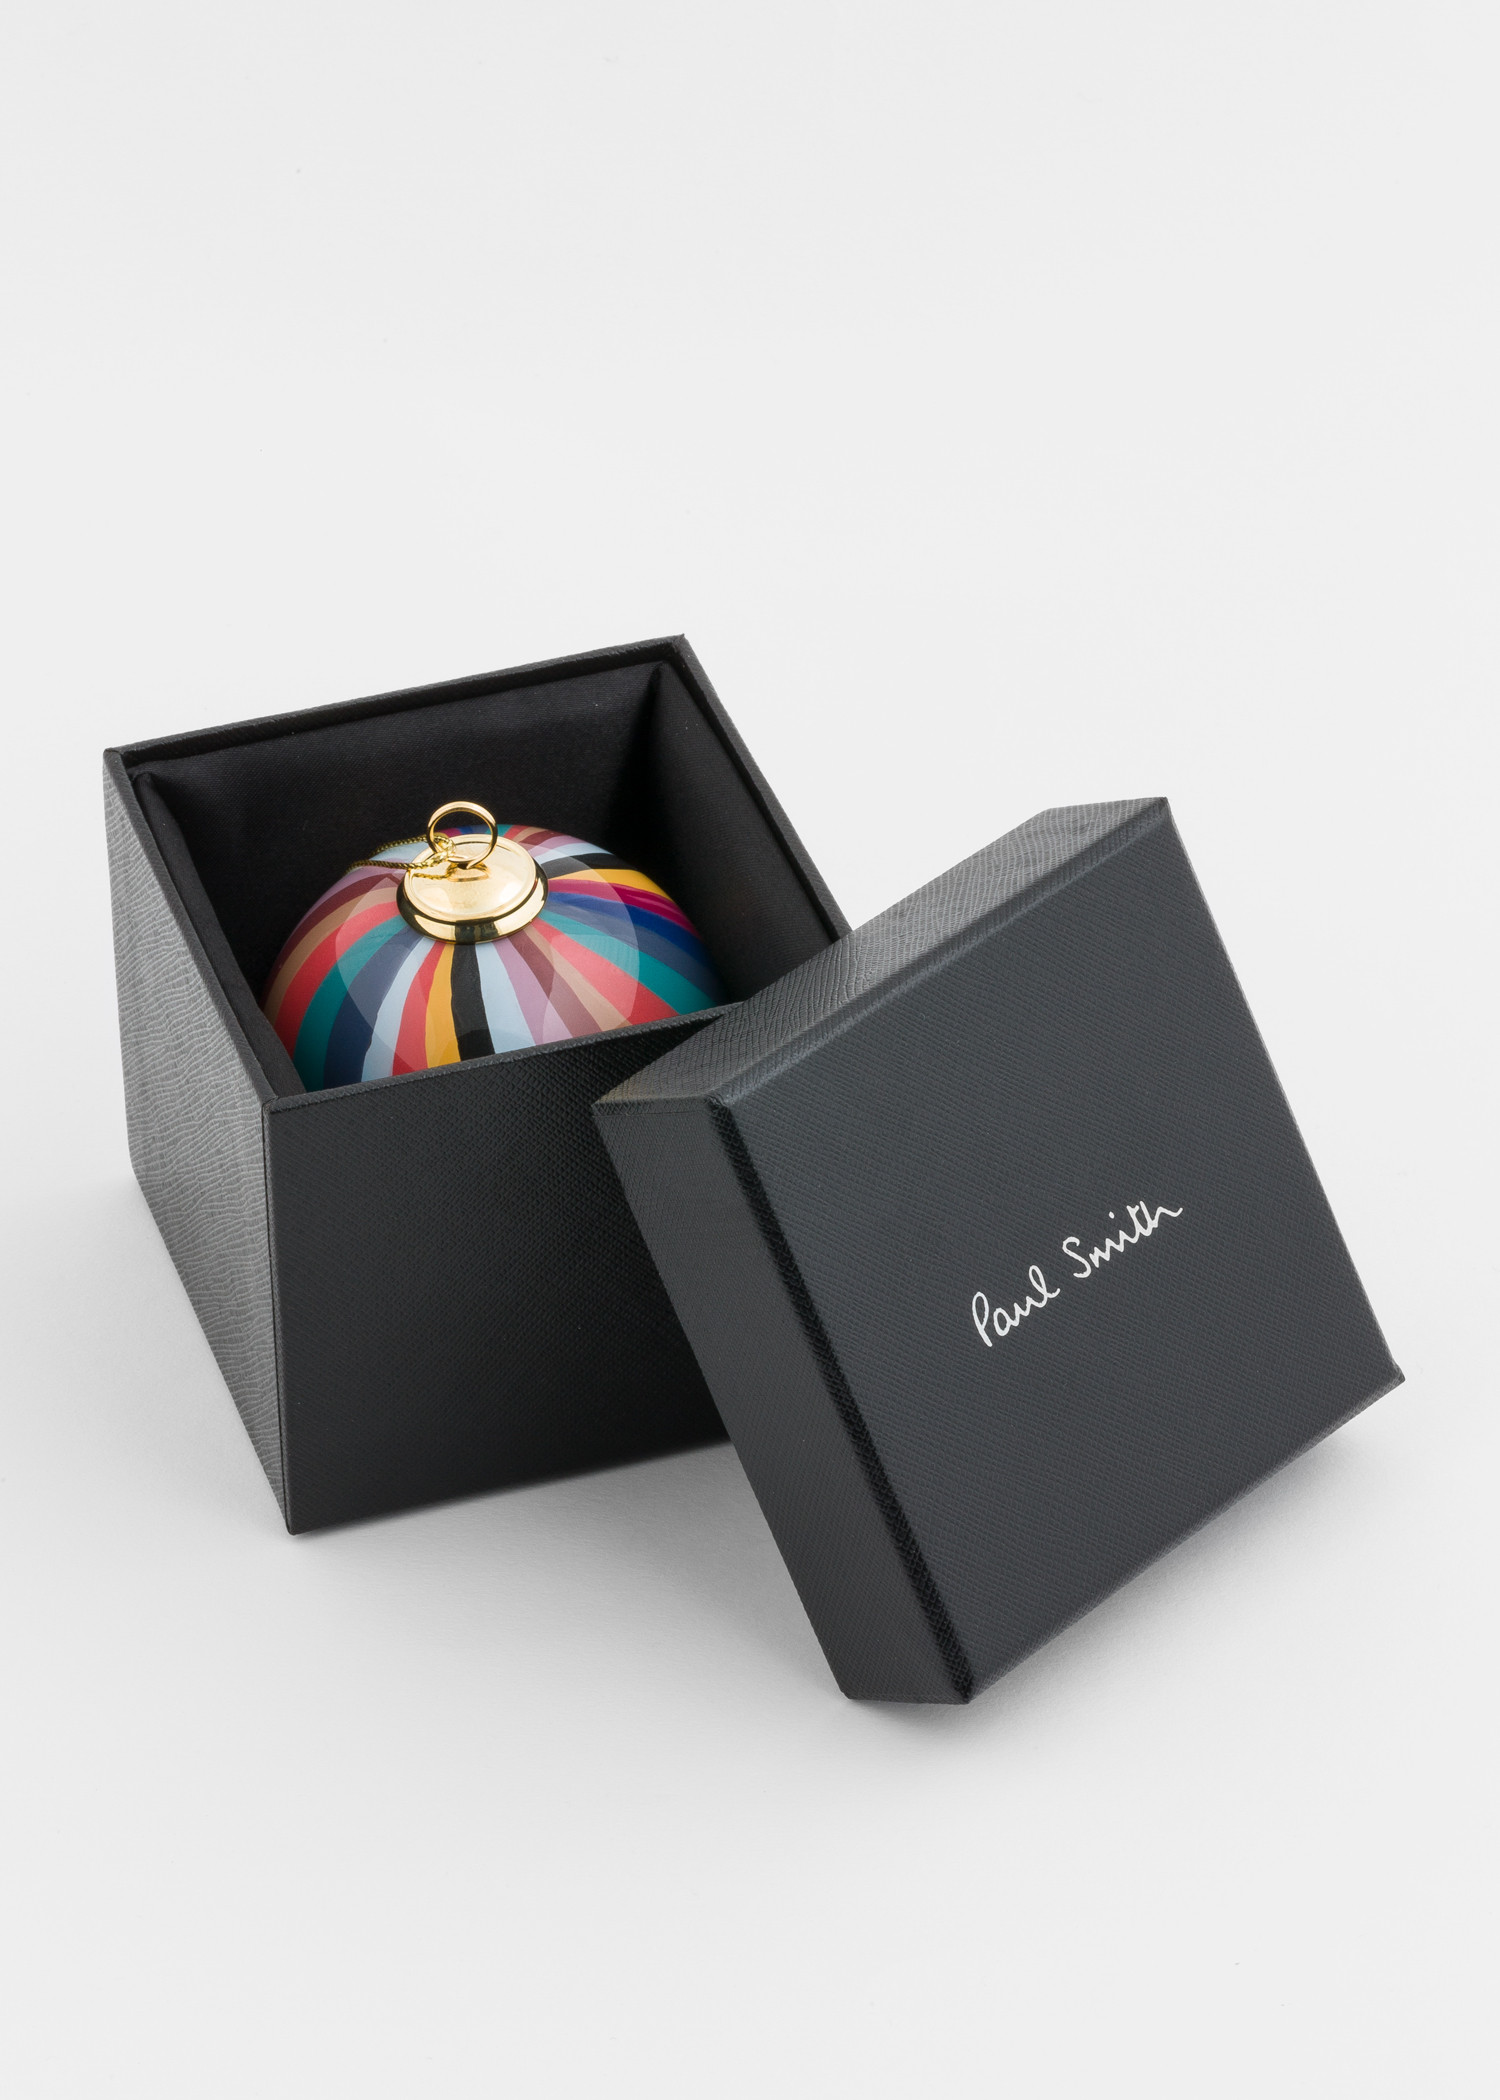 Hand-Painted Swirl Glass Bauble by Paul Smith